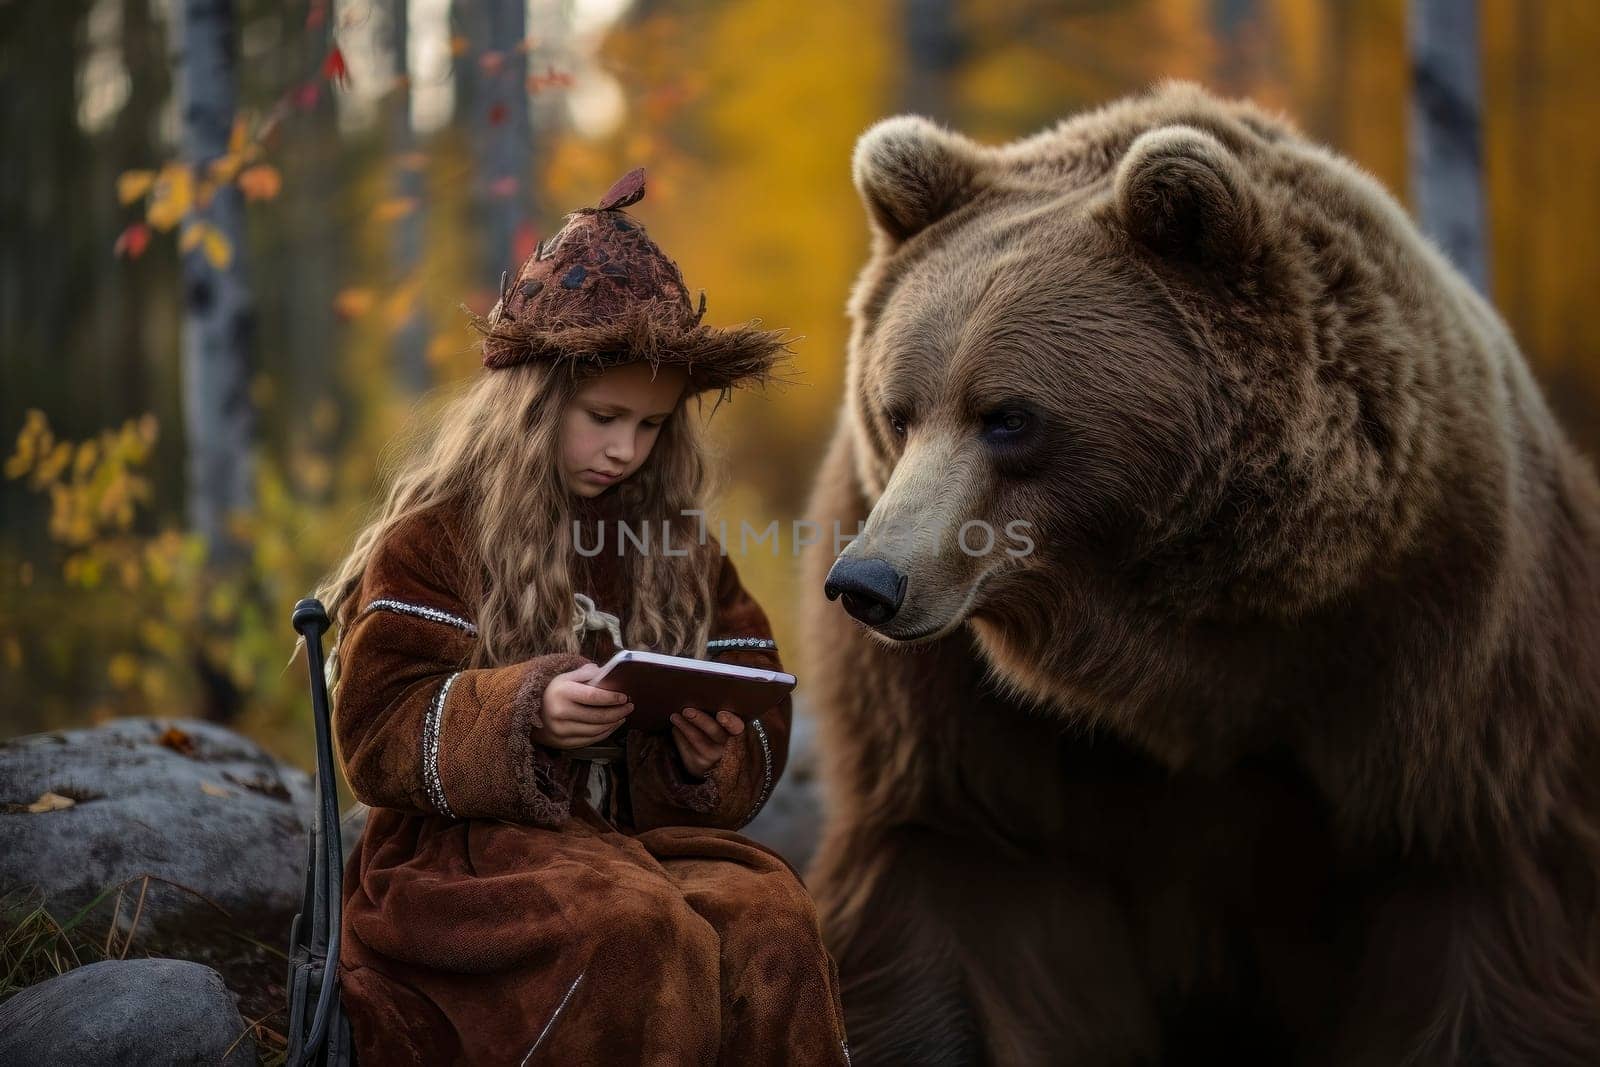 Image portraying a little girl with her fairy bear engrossed in a smartphone, symbolizing the hypnotic impact of social media on modern generations.